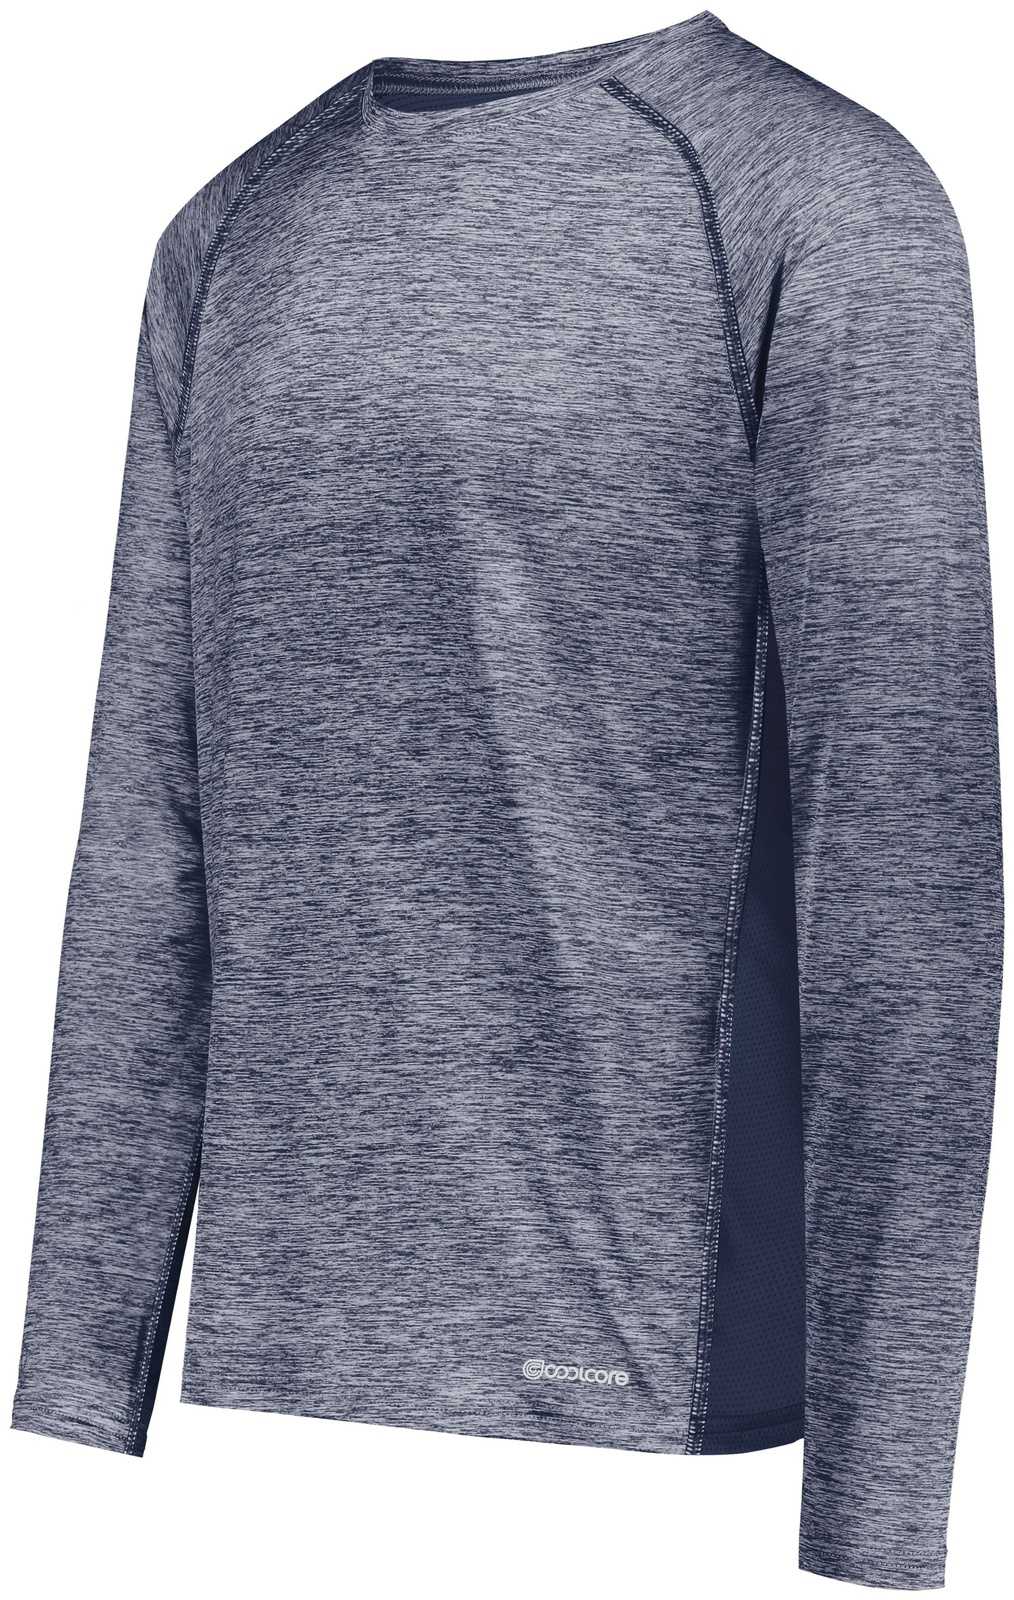 Holloway 222570 Electrify CoolCore Long Sleeve T-Shirt - Navy Heather - HIT a Double